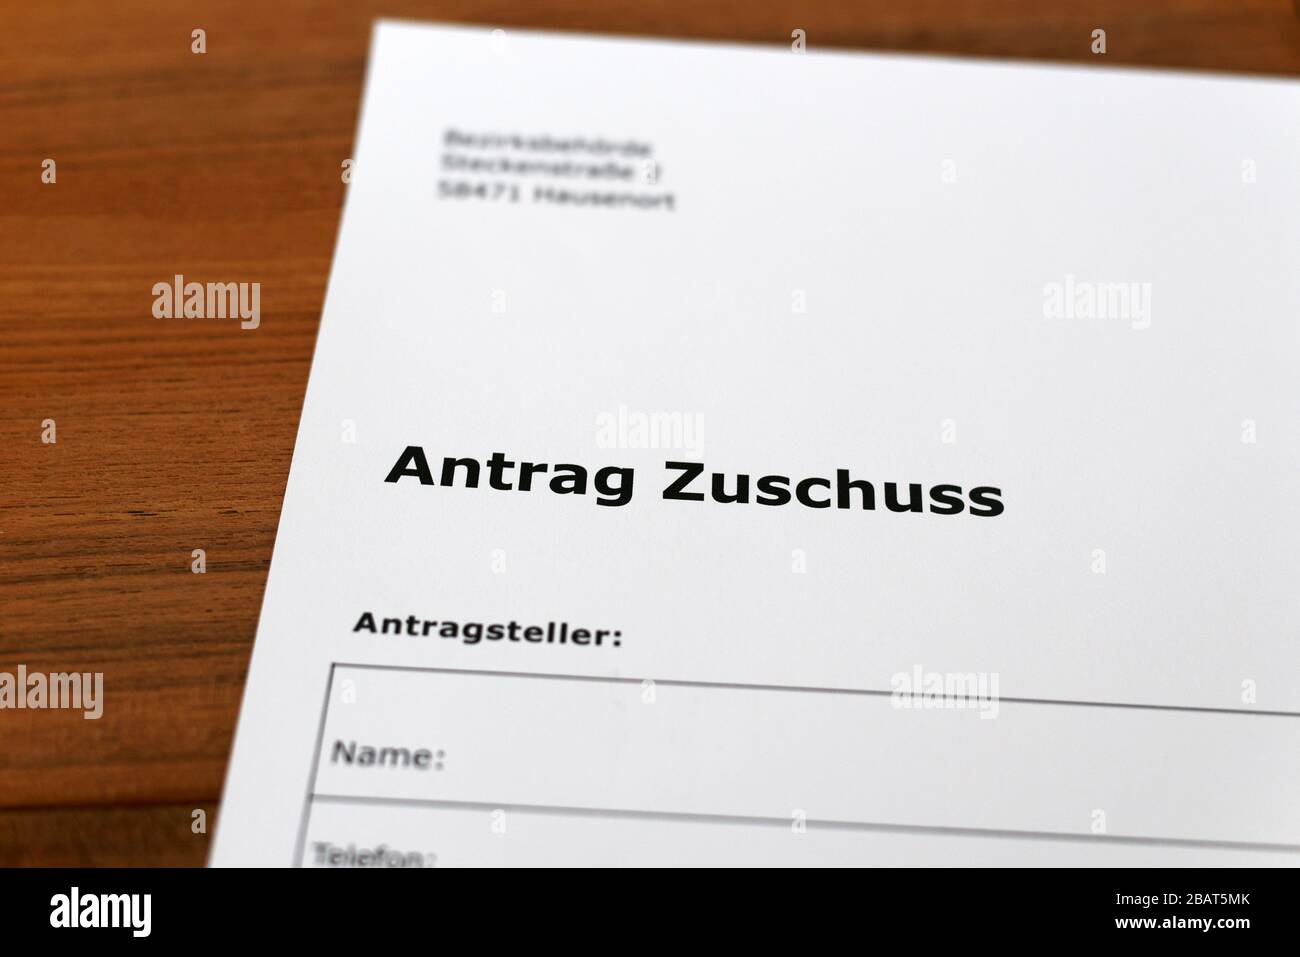 A sheet of paper with the german words 'Antrag Zuschuss' - Translation in englisch: Grant application. Stock Photo